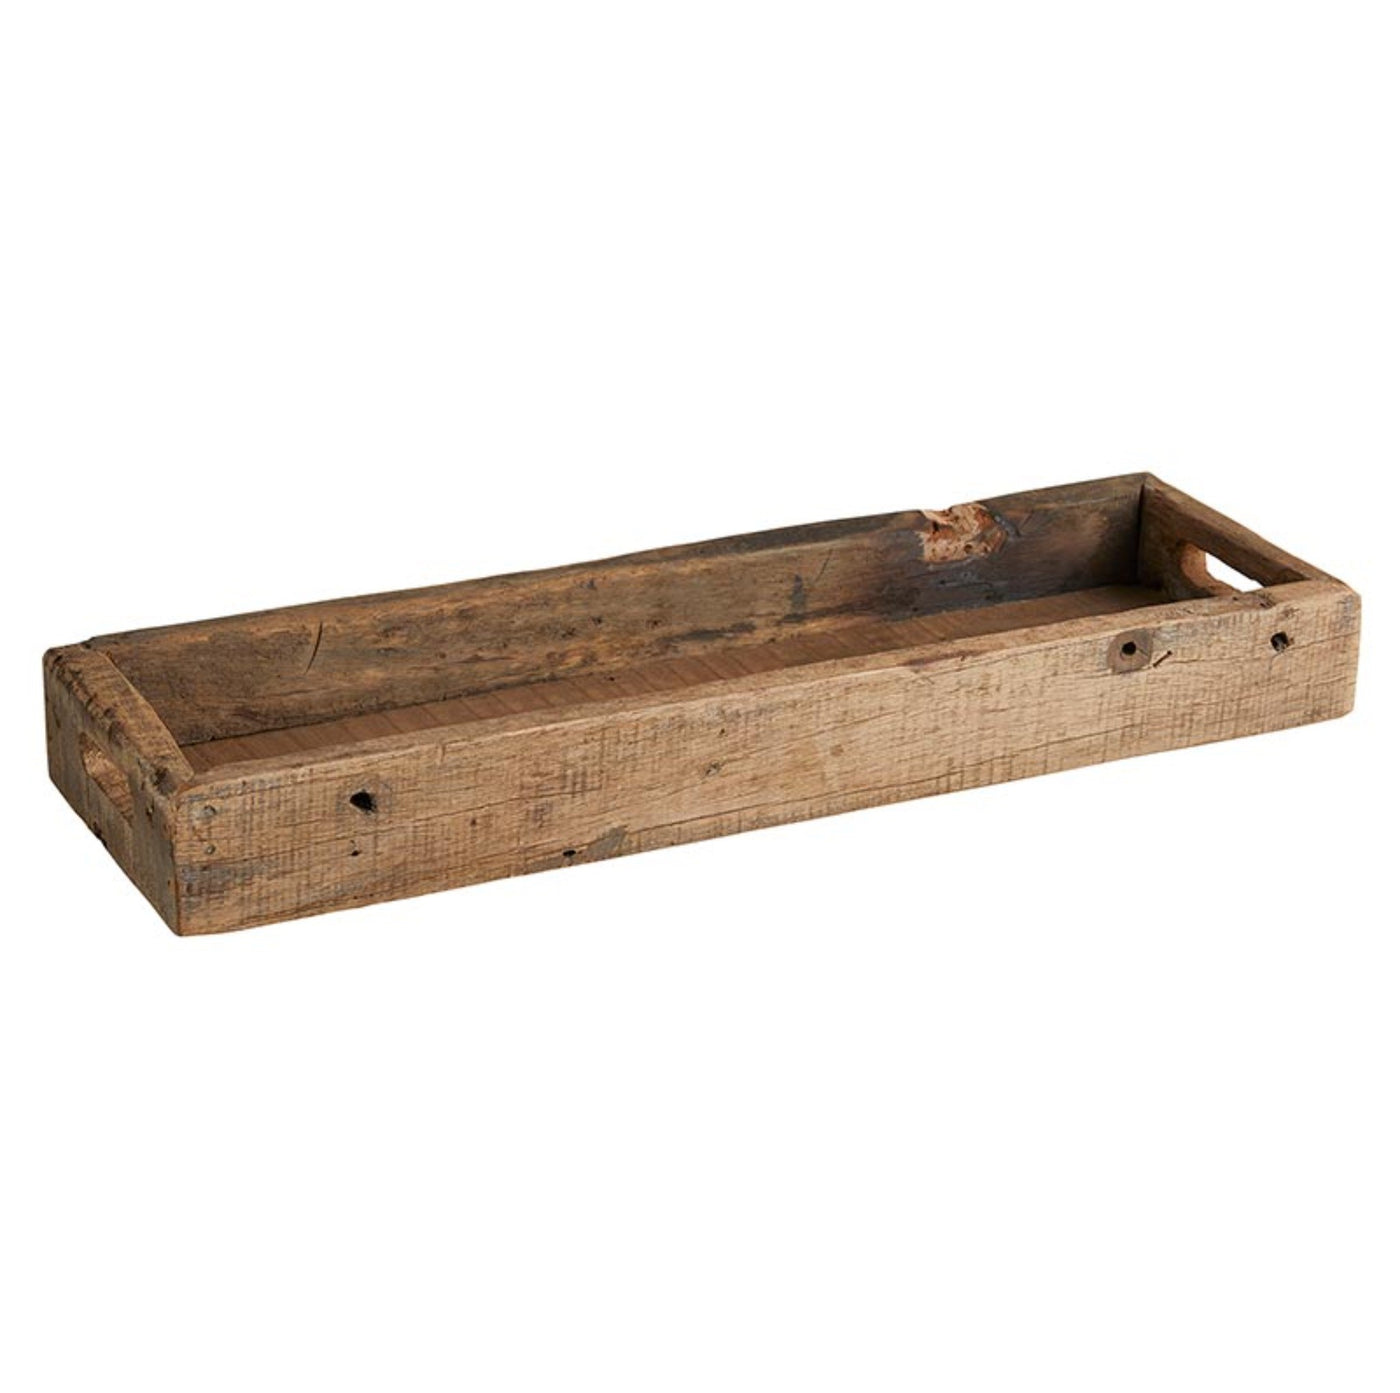 Rustic Wooden Rectangle Tray: Size - 24"L x 7"W x 2.5"H by 47th & Main #CMR013